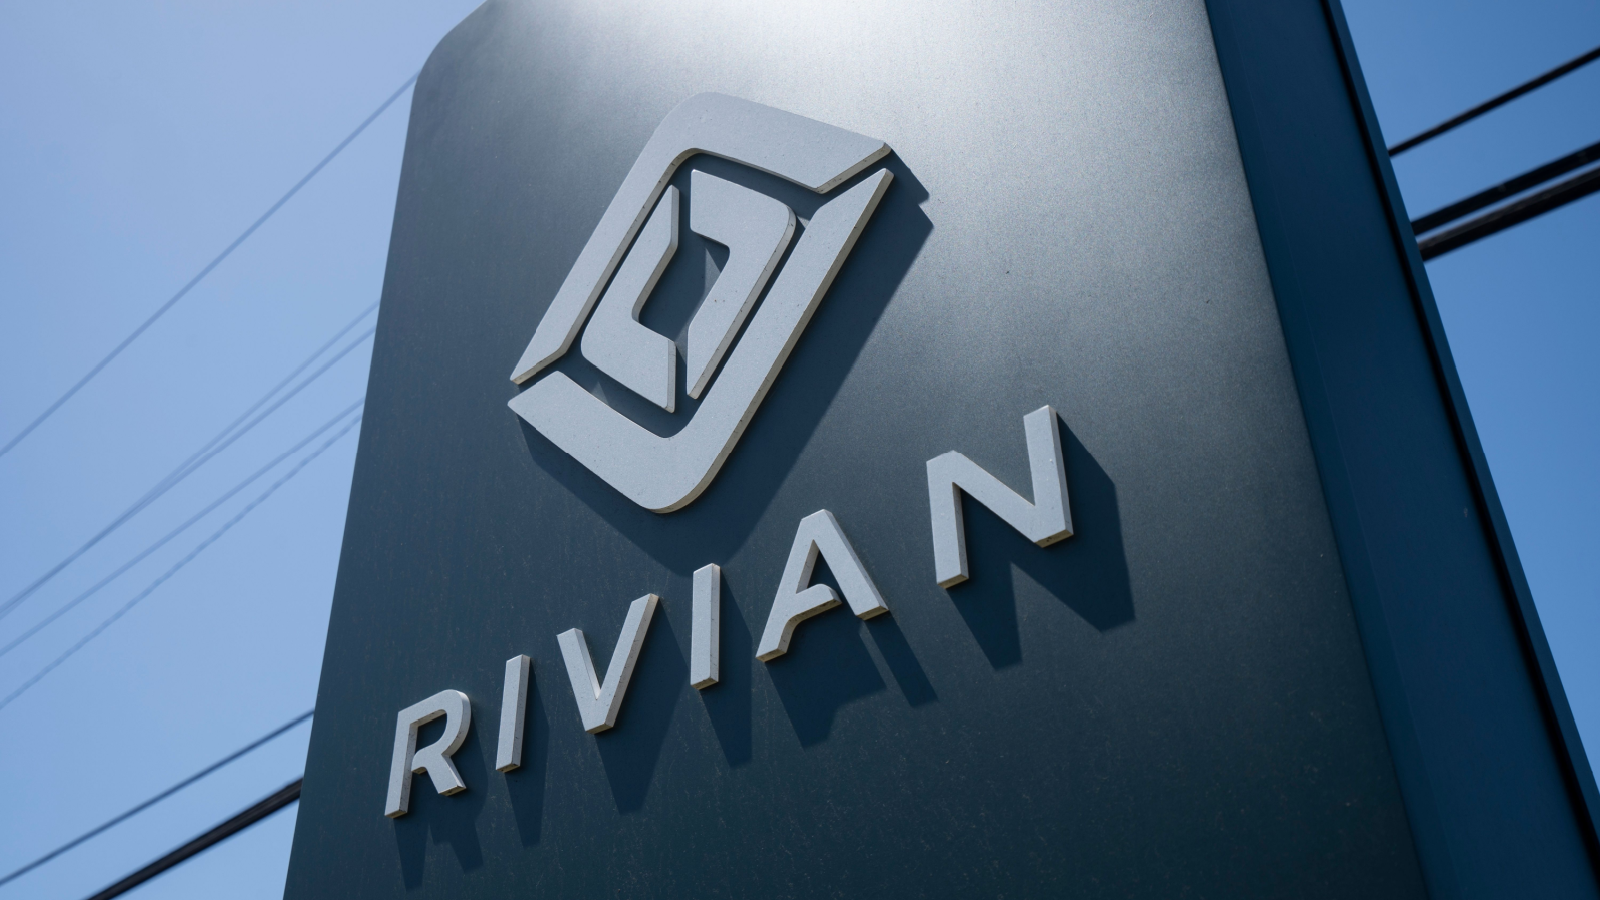 RIVN Stock: Rivian Just Got $827 Million to Expand Its Illinois Plant